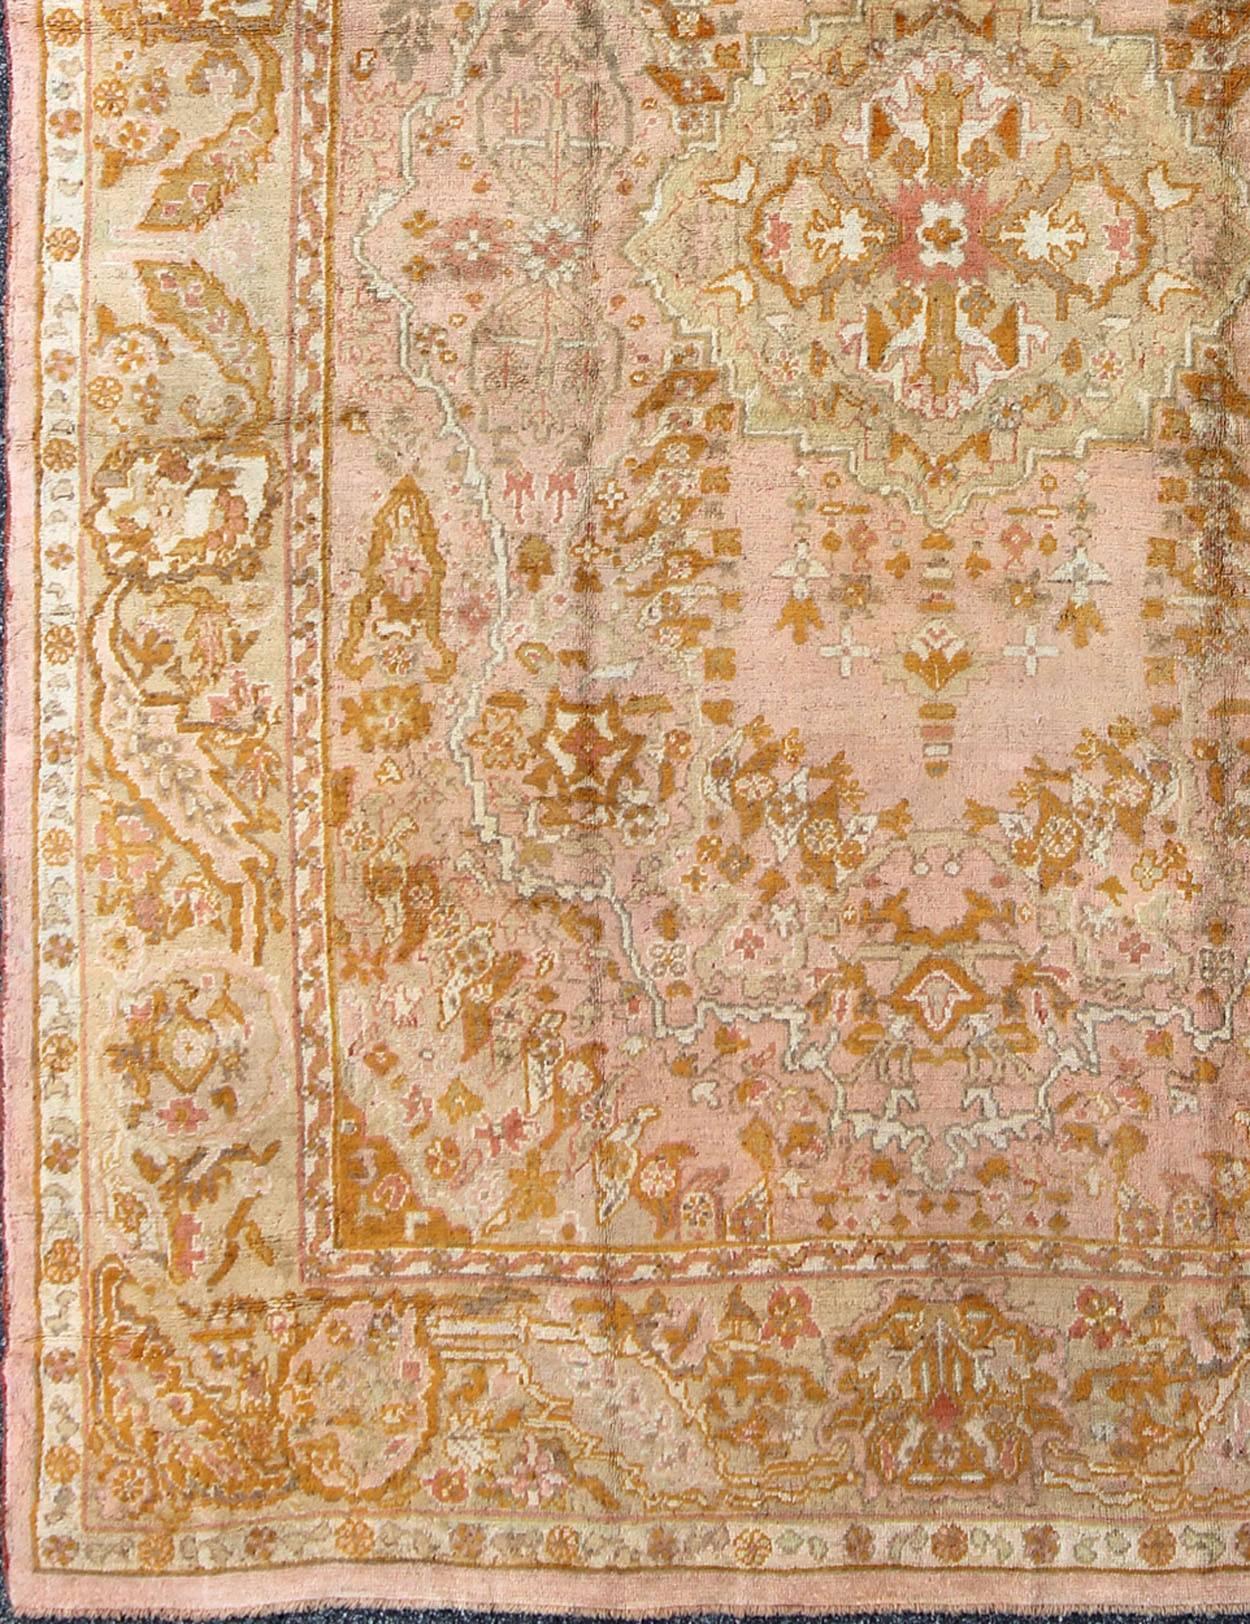 Antique Floral Pattern Oushak Rug. Keivan Woven Arts / rug /S12-0304, country of origin / type: Turkey / Oushak

Measures: 8'8 x 11'9

This elegant Antique Oushak from the early 20 century bears a stylized small center surrounded by flowers all over